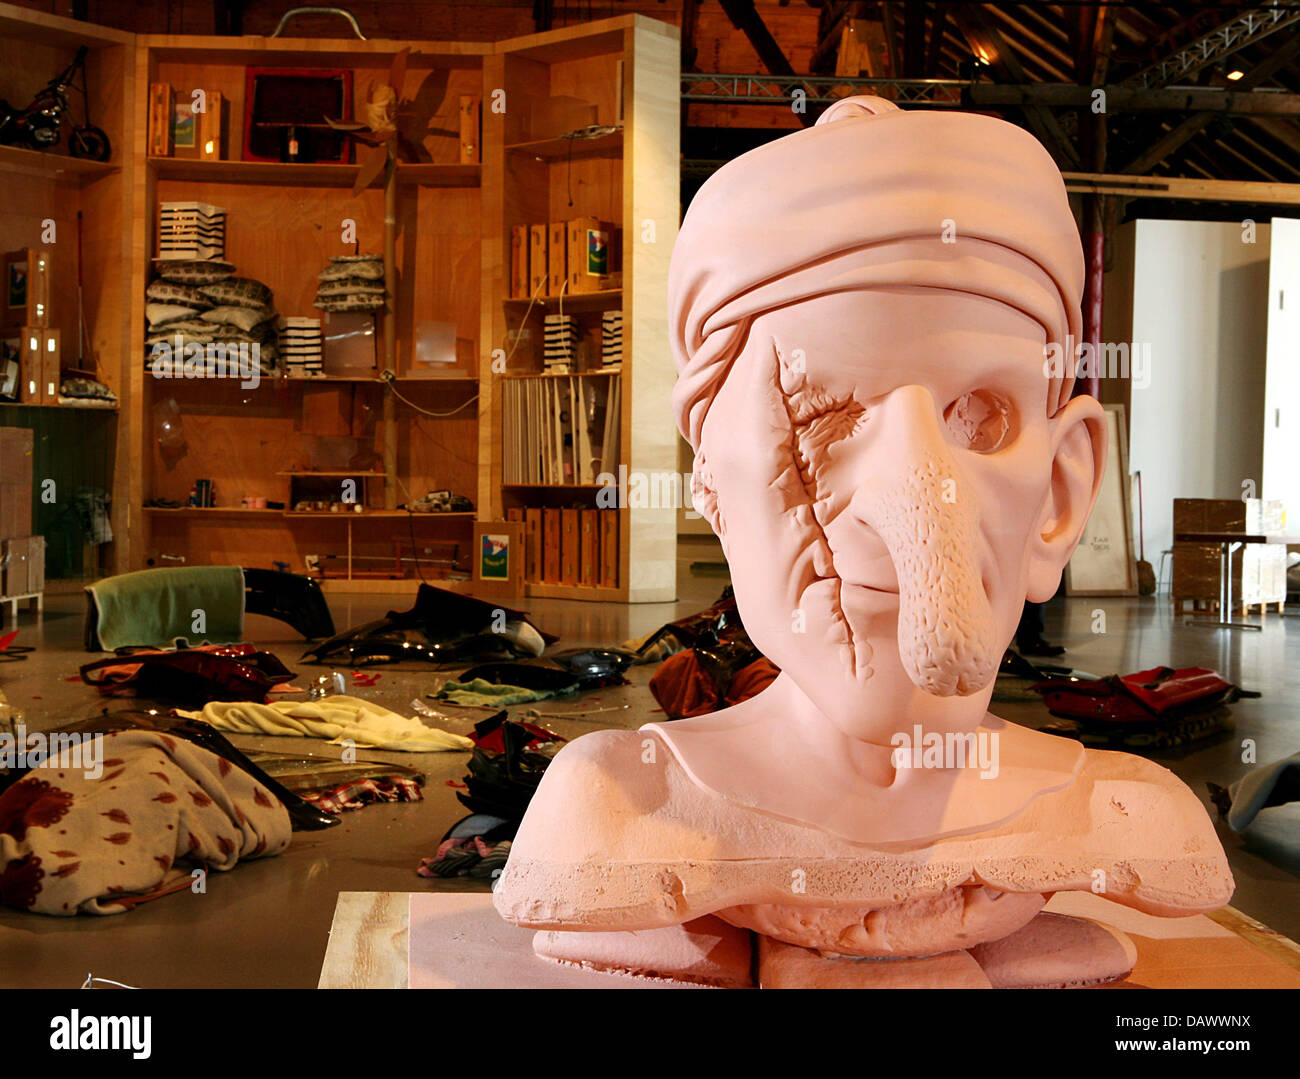 A visitor of the 10th 'Triennale Kleinplastik' looks at the sculpture of pirate Jack by Paul McCarthy at the 'Alten Kelter' in Fellbach, Germany, 23 June 2007. On 2.500sqm exhibition space sculptures by 50 international artists are on display under the motto 'Bodycheck' from 23 June 2007 to 23 September 2007. Photo: Bernd Weissbrod Stock Photo